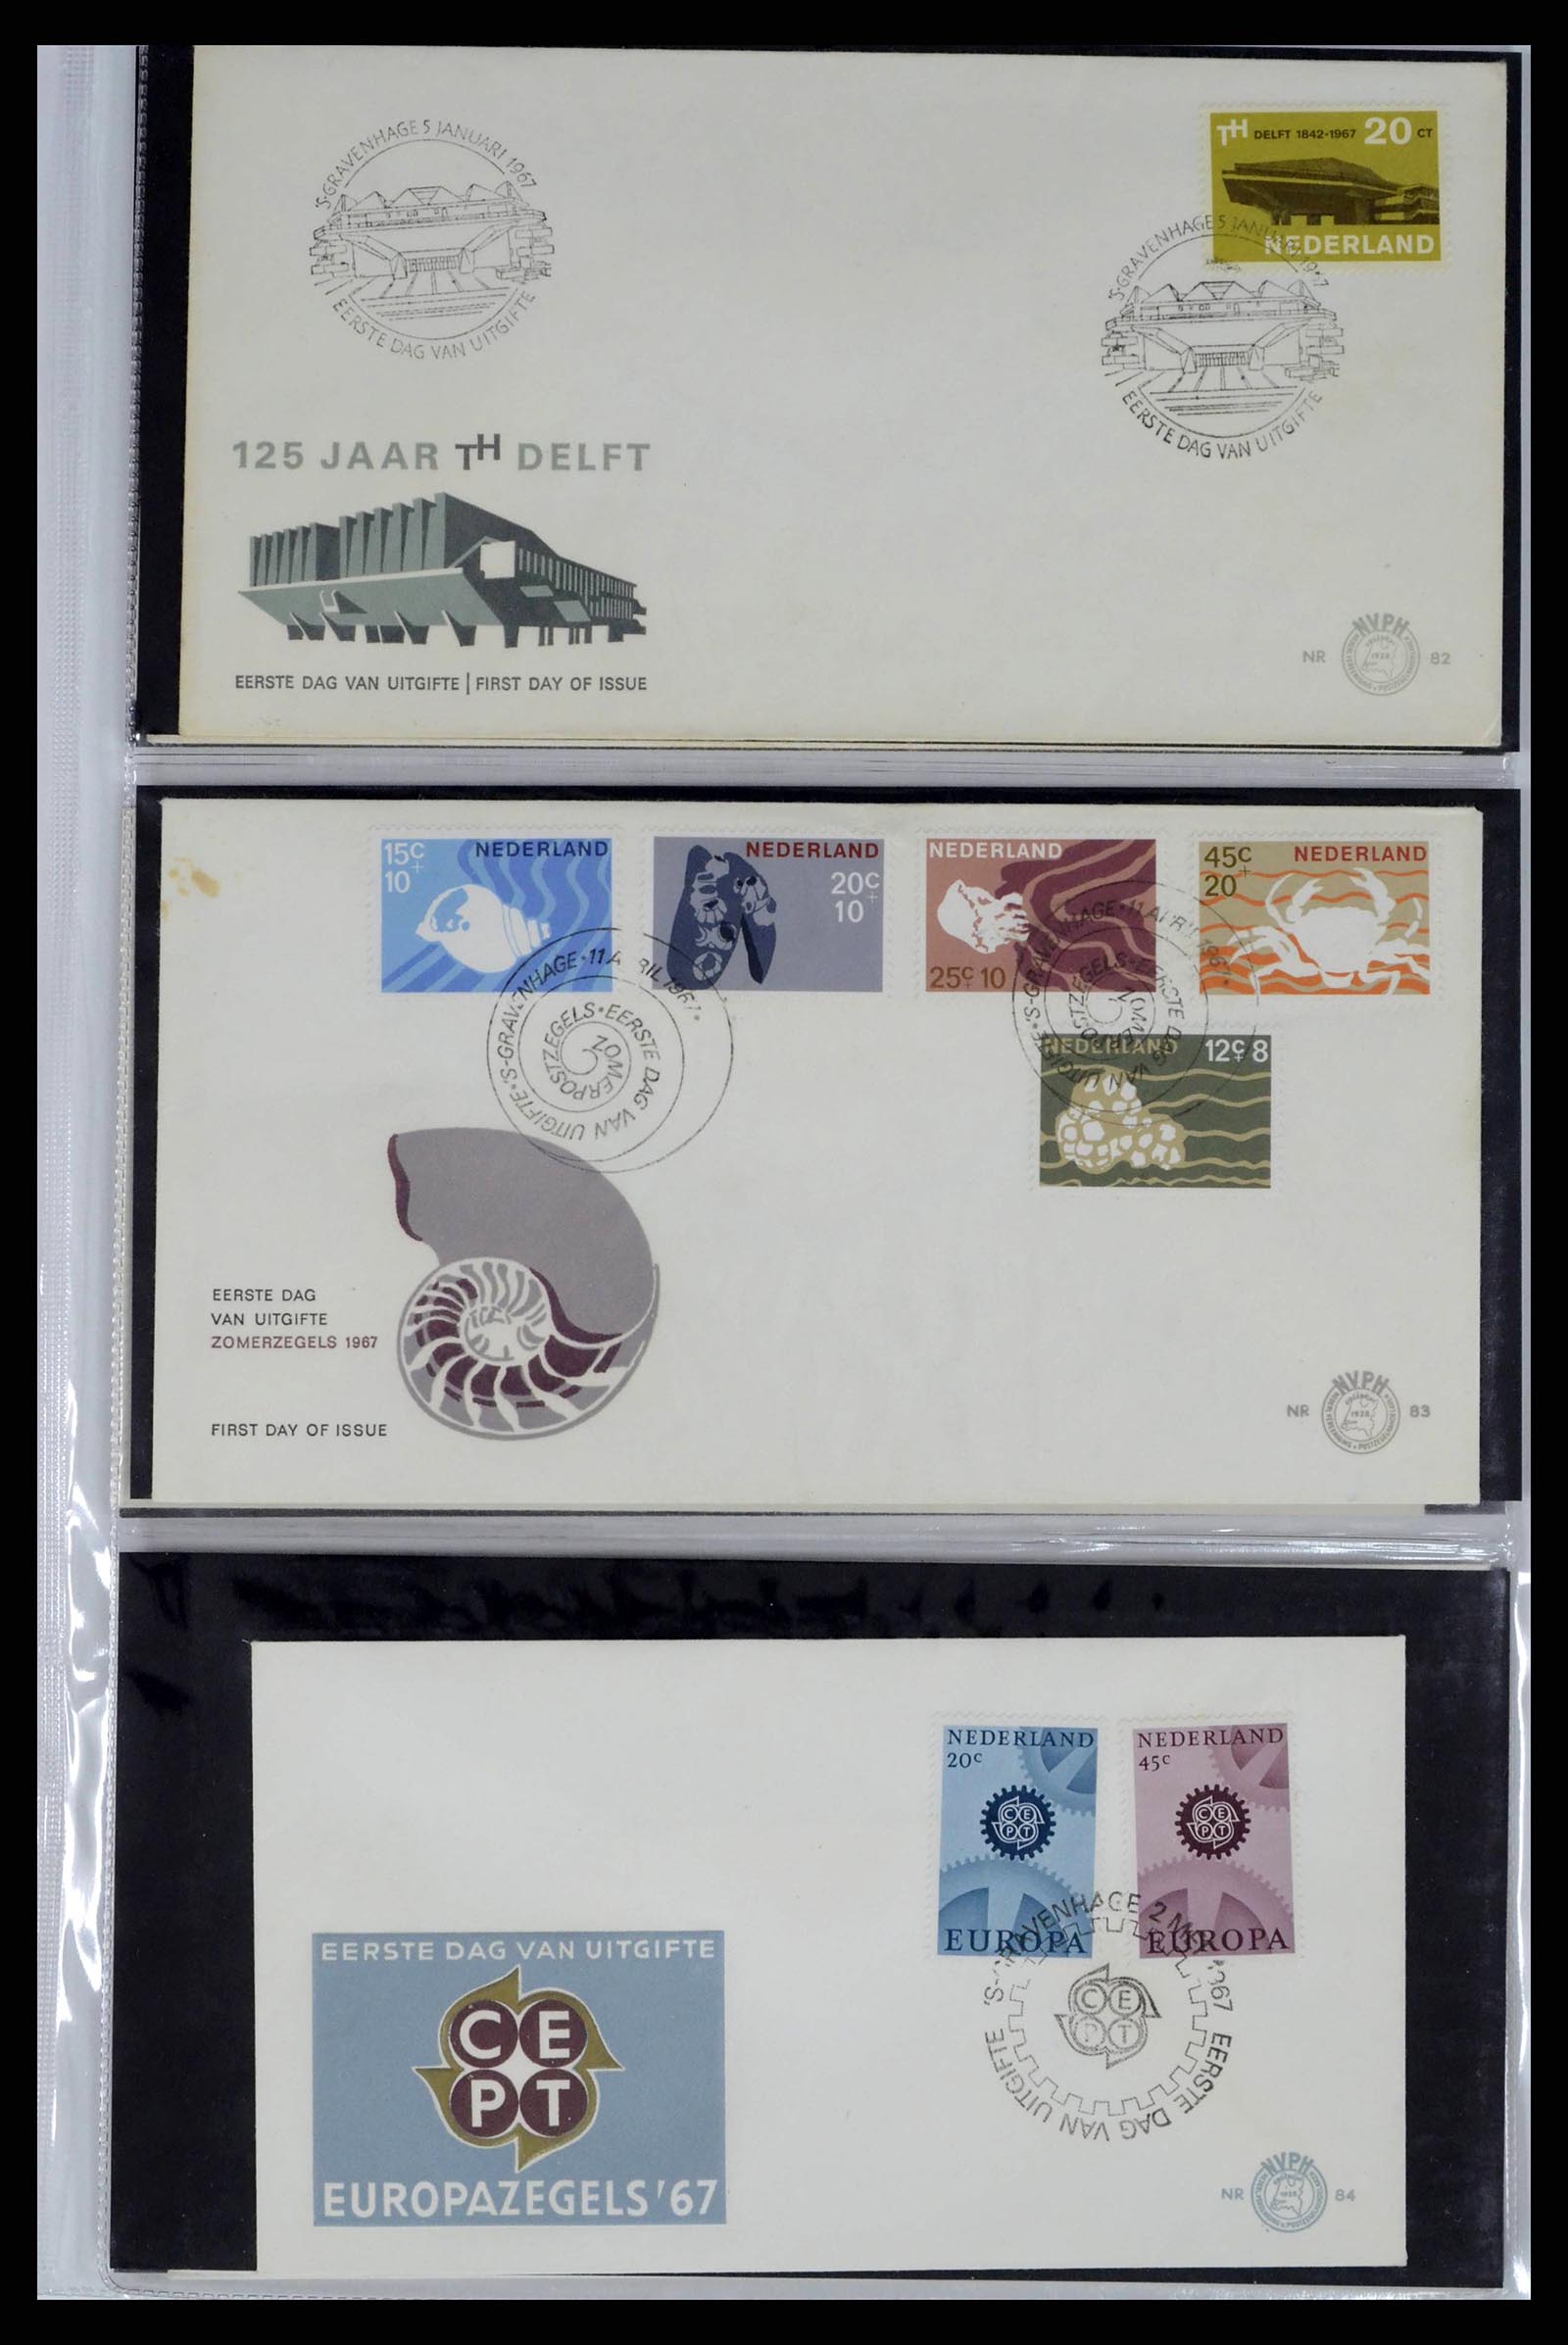 38271 0028 - Stamp collection 38271 Netherlands FDC's 1950-1995.